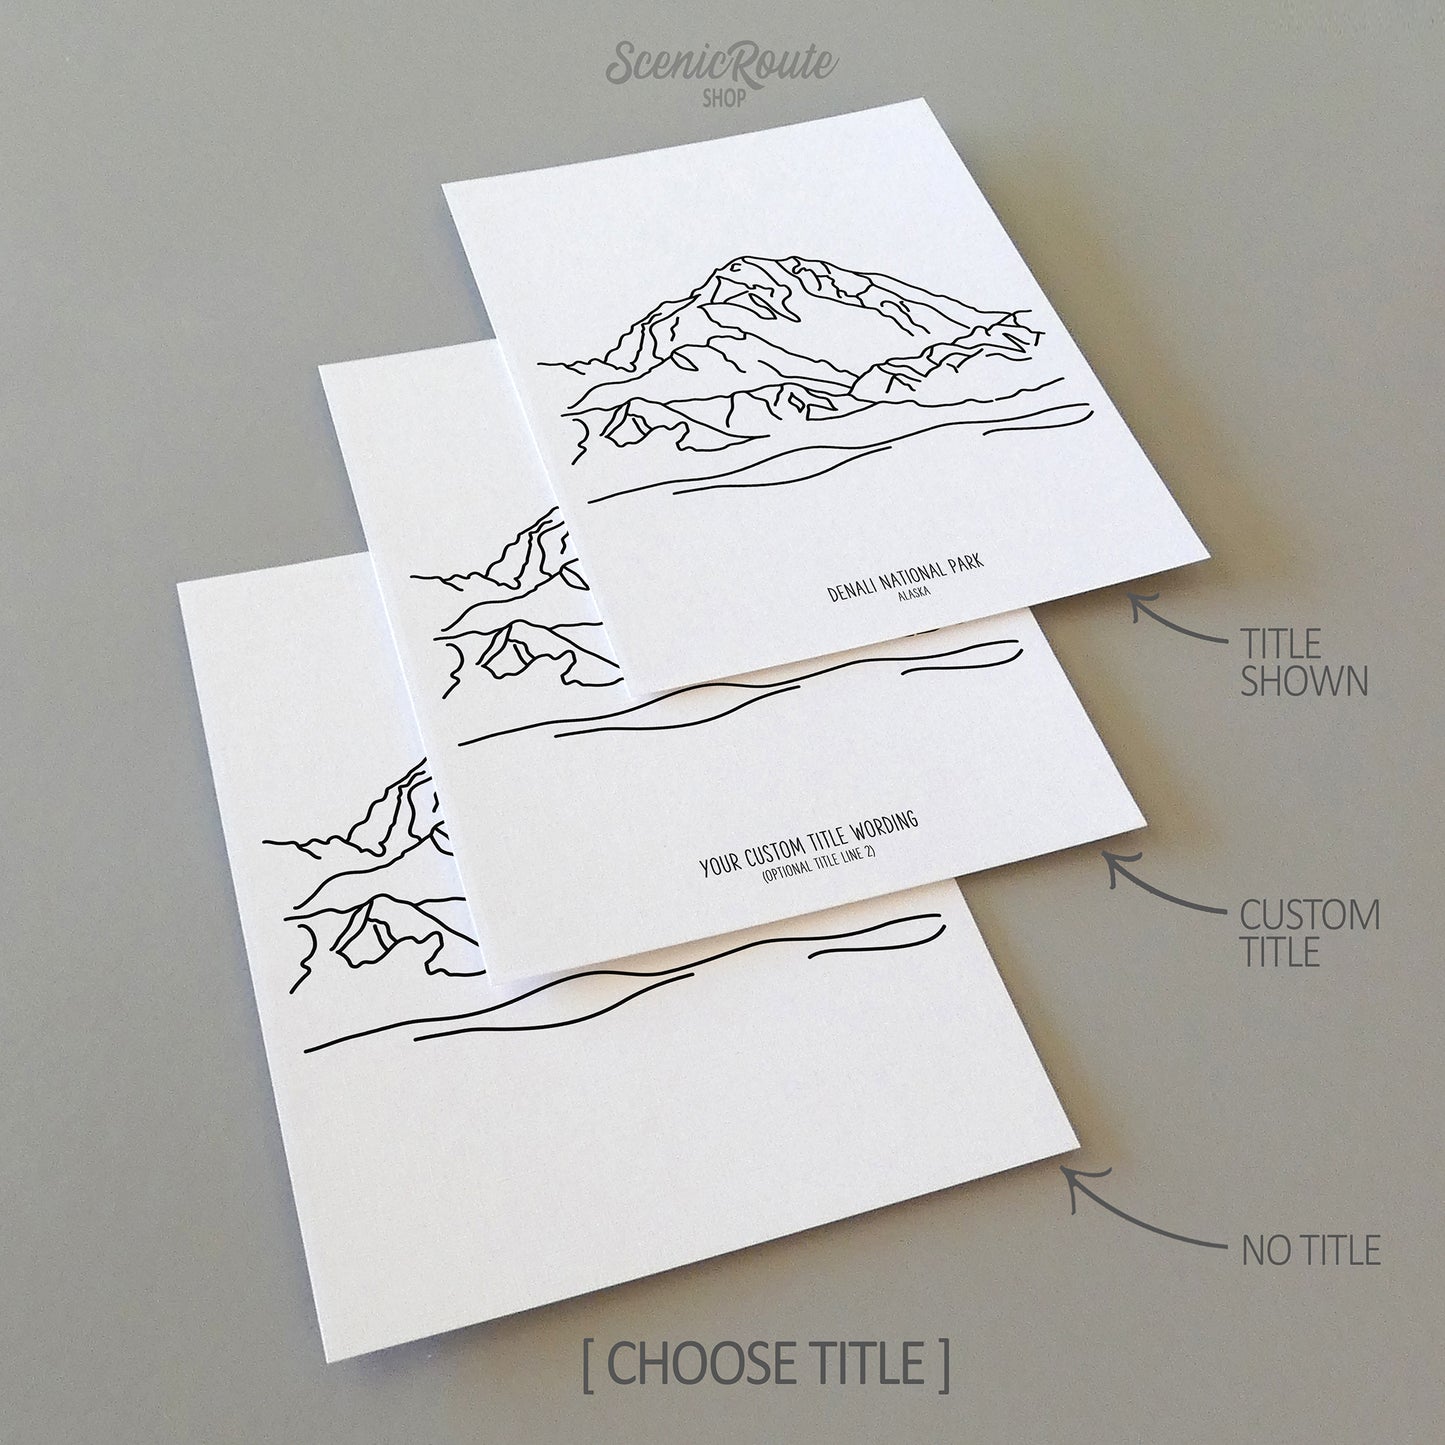 Three line art drawings of Denali National Park on white linen paper with a gray background. The pieces are shown with title options that can be chosen and personalized.